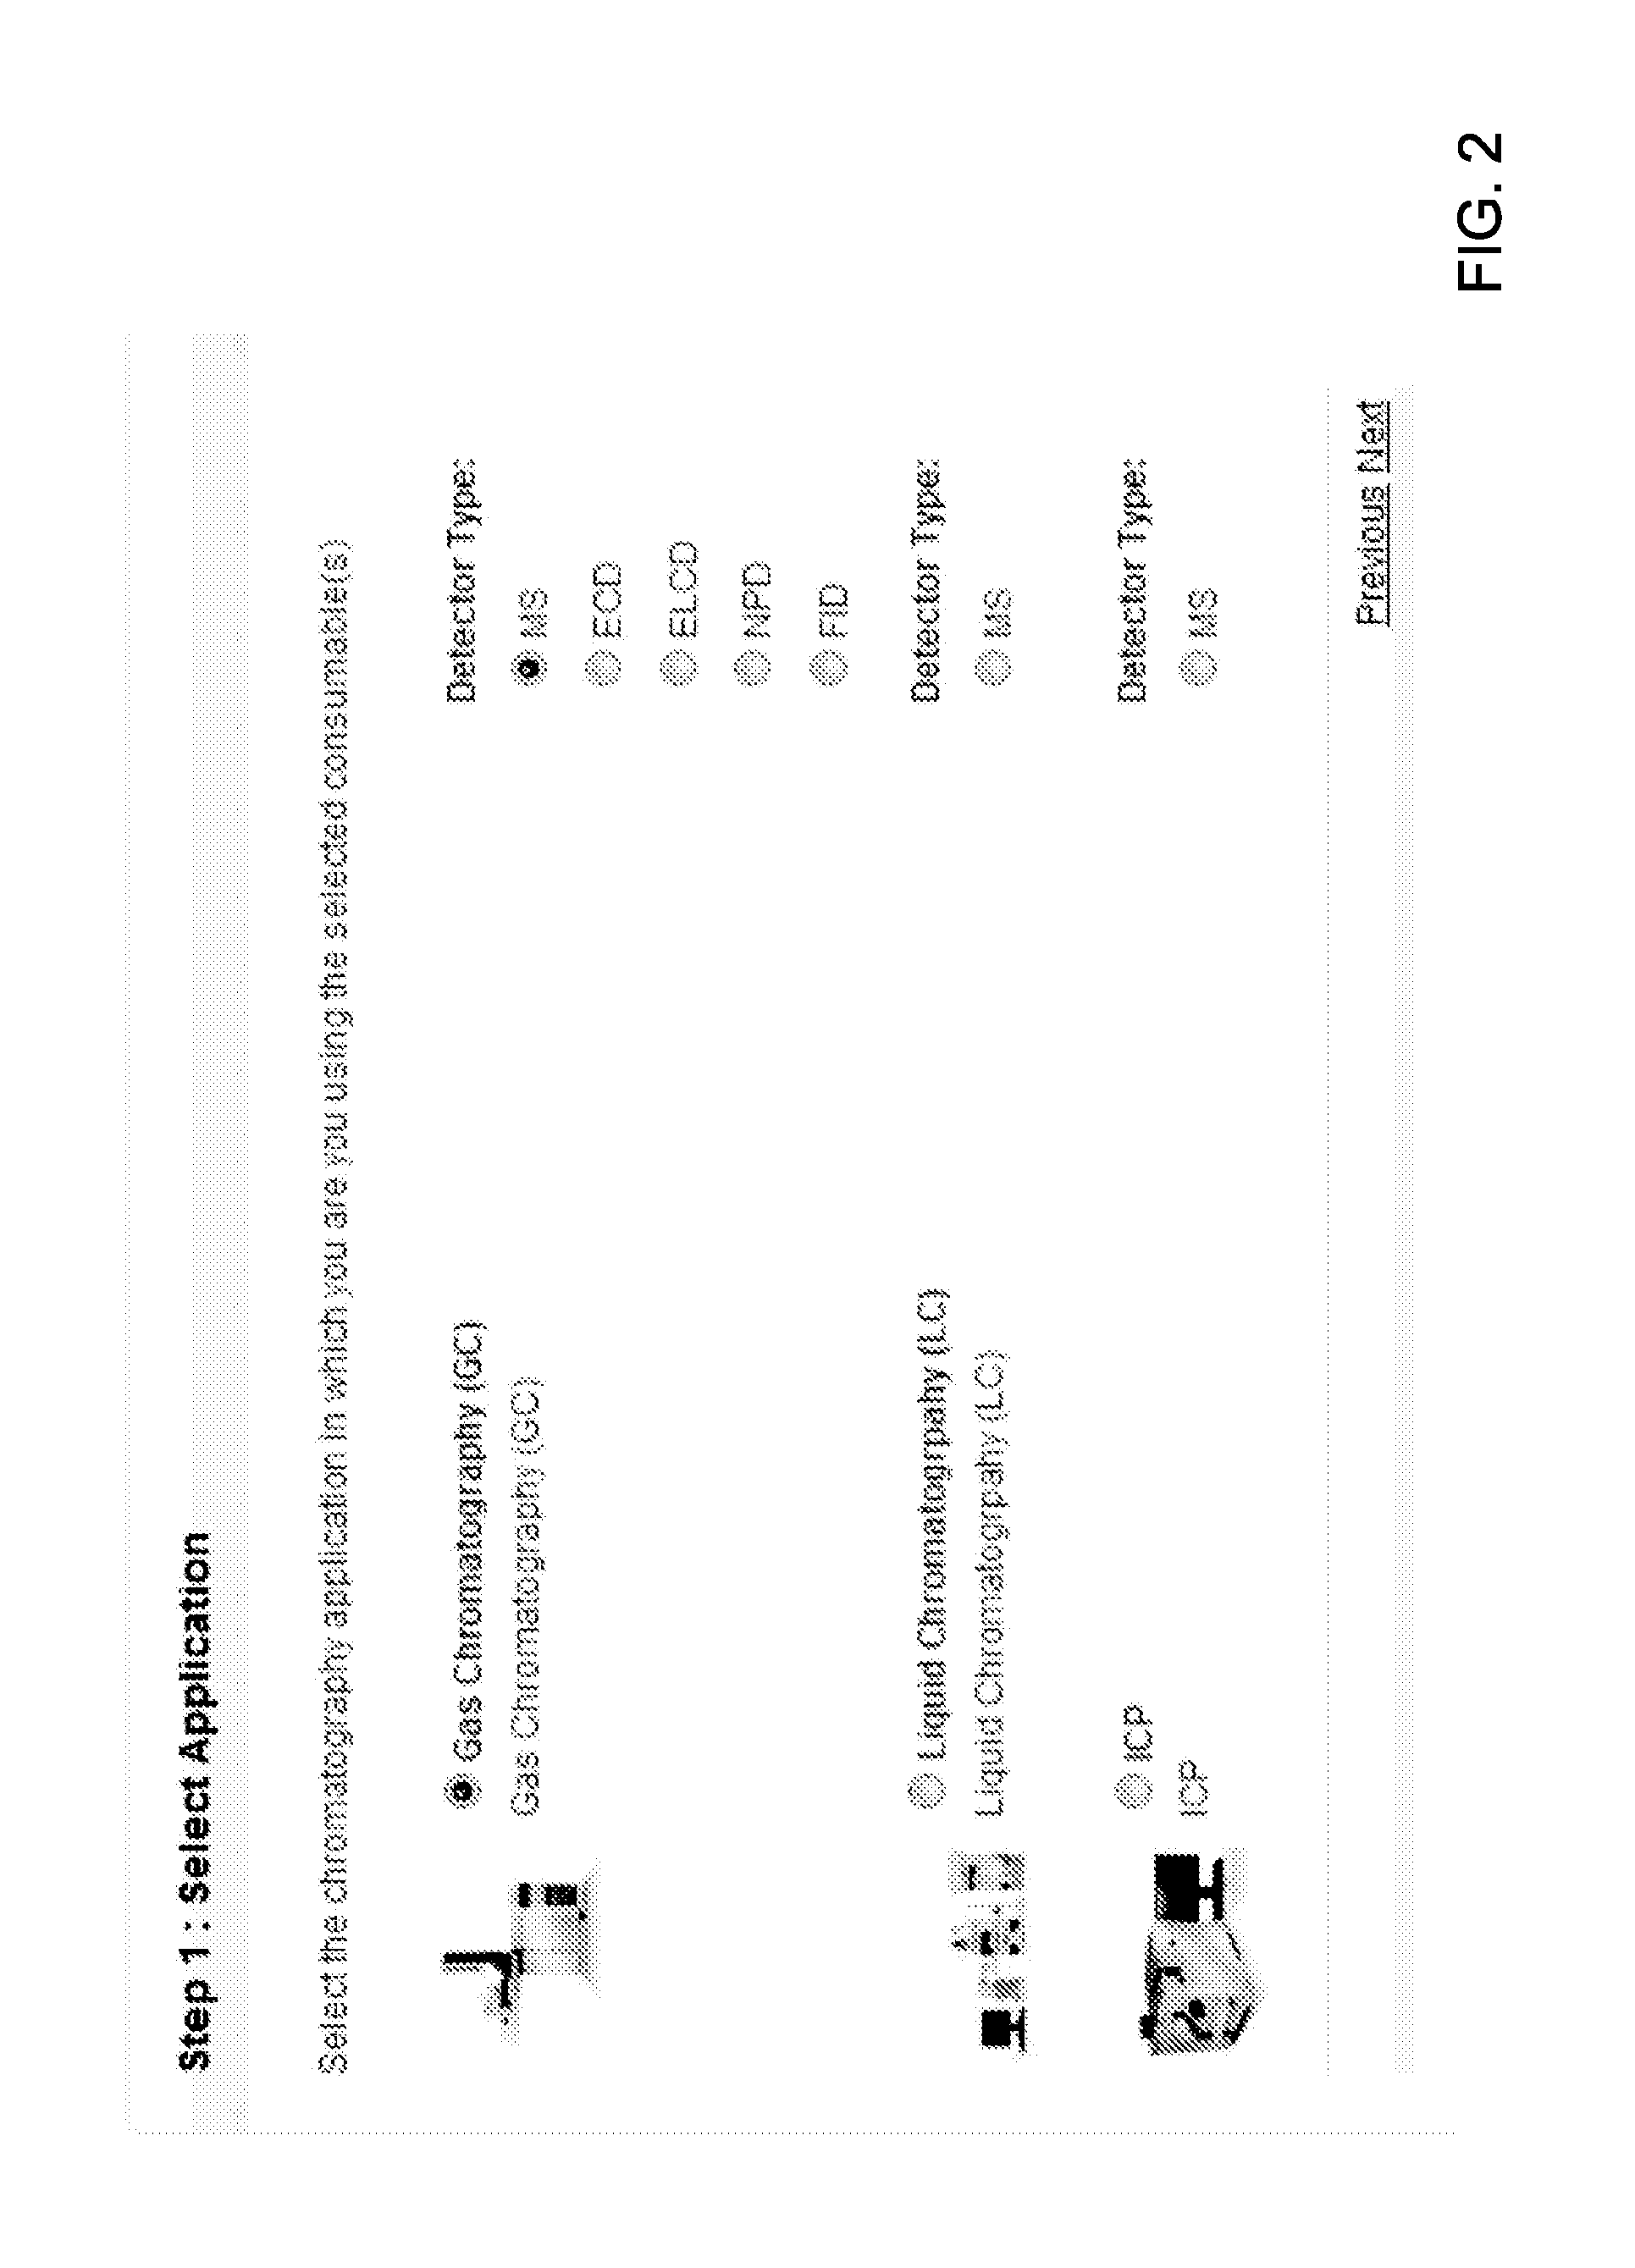 System and method for managing replacement of consumables including recyclable gas purifiers